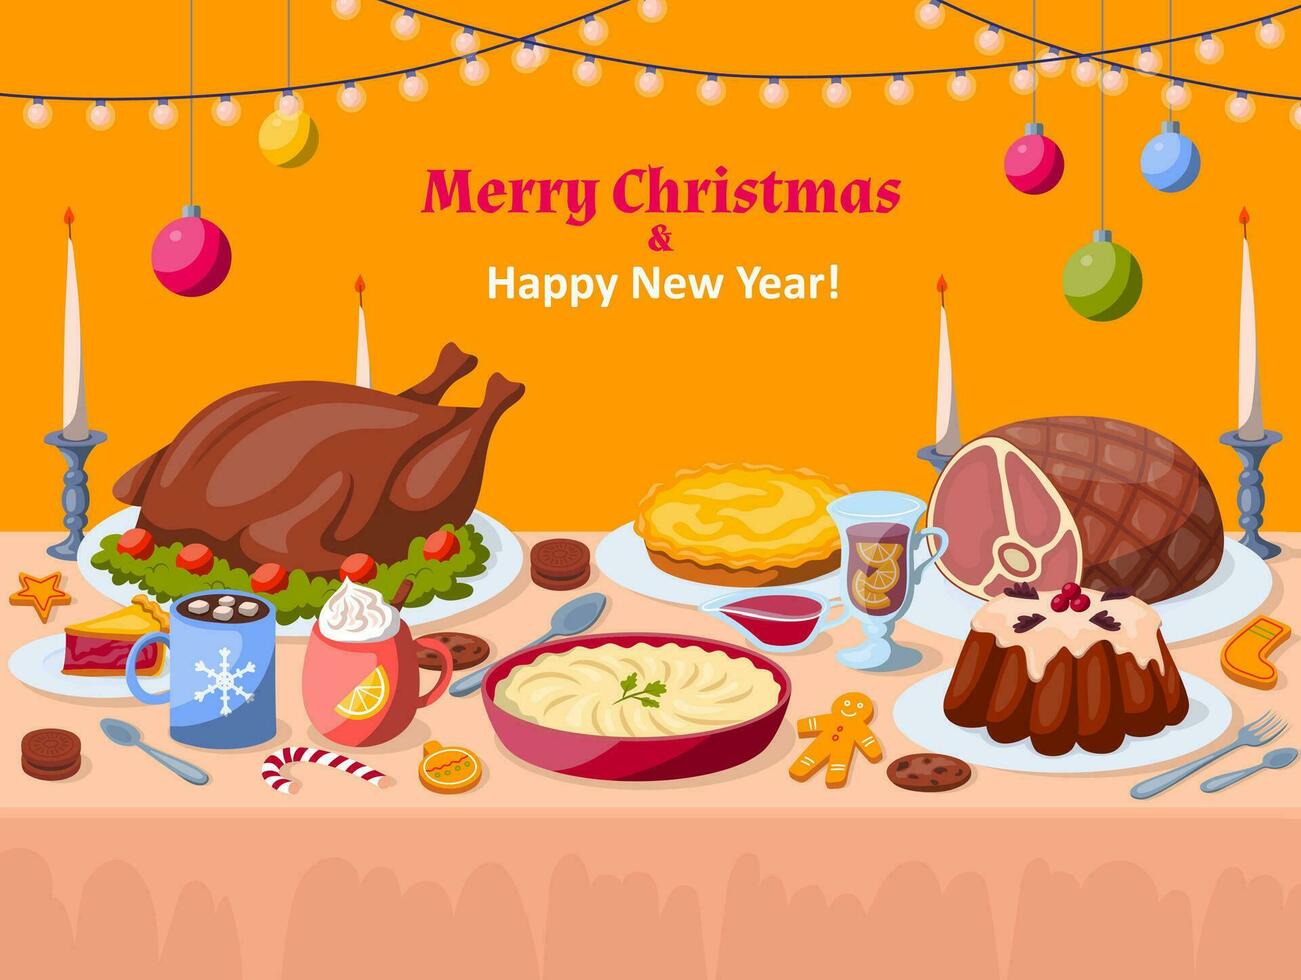 Cartoon Color Christmas Dishes on Table Concept Poster Card Invitation. Vector